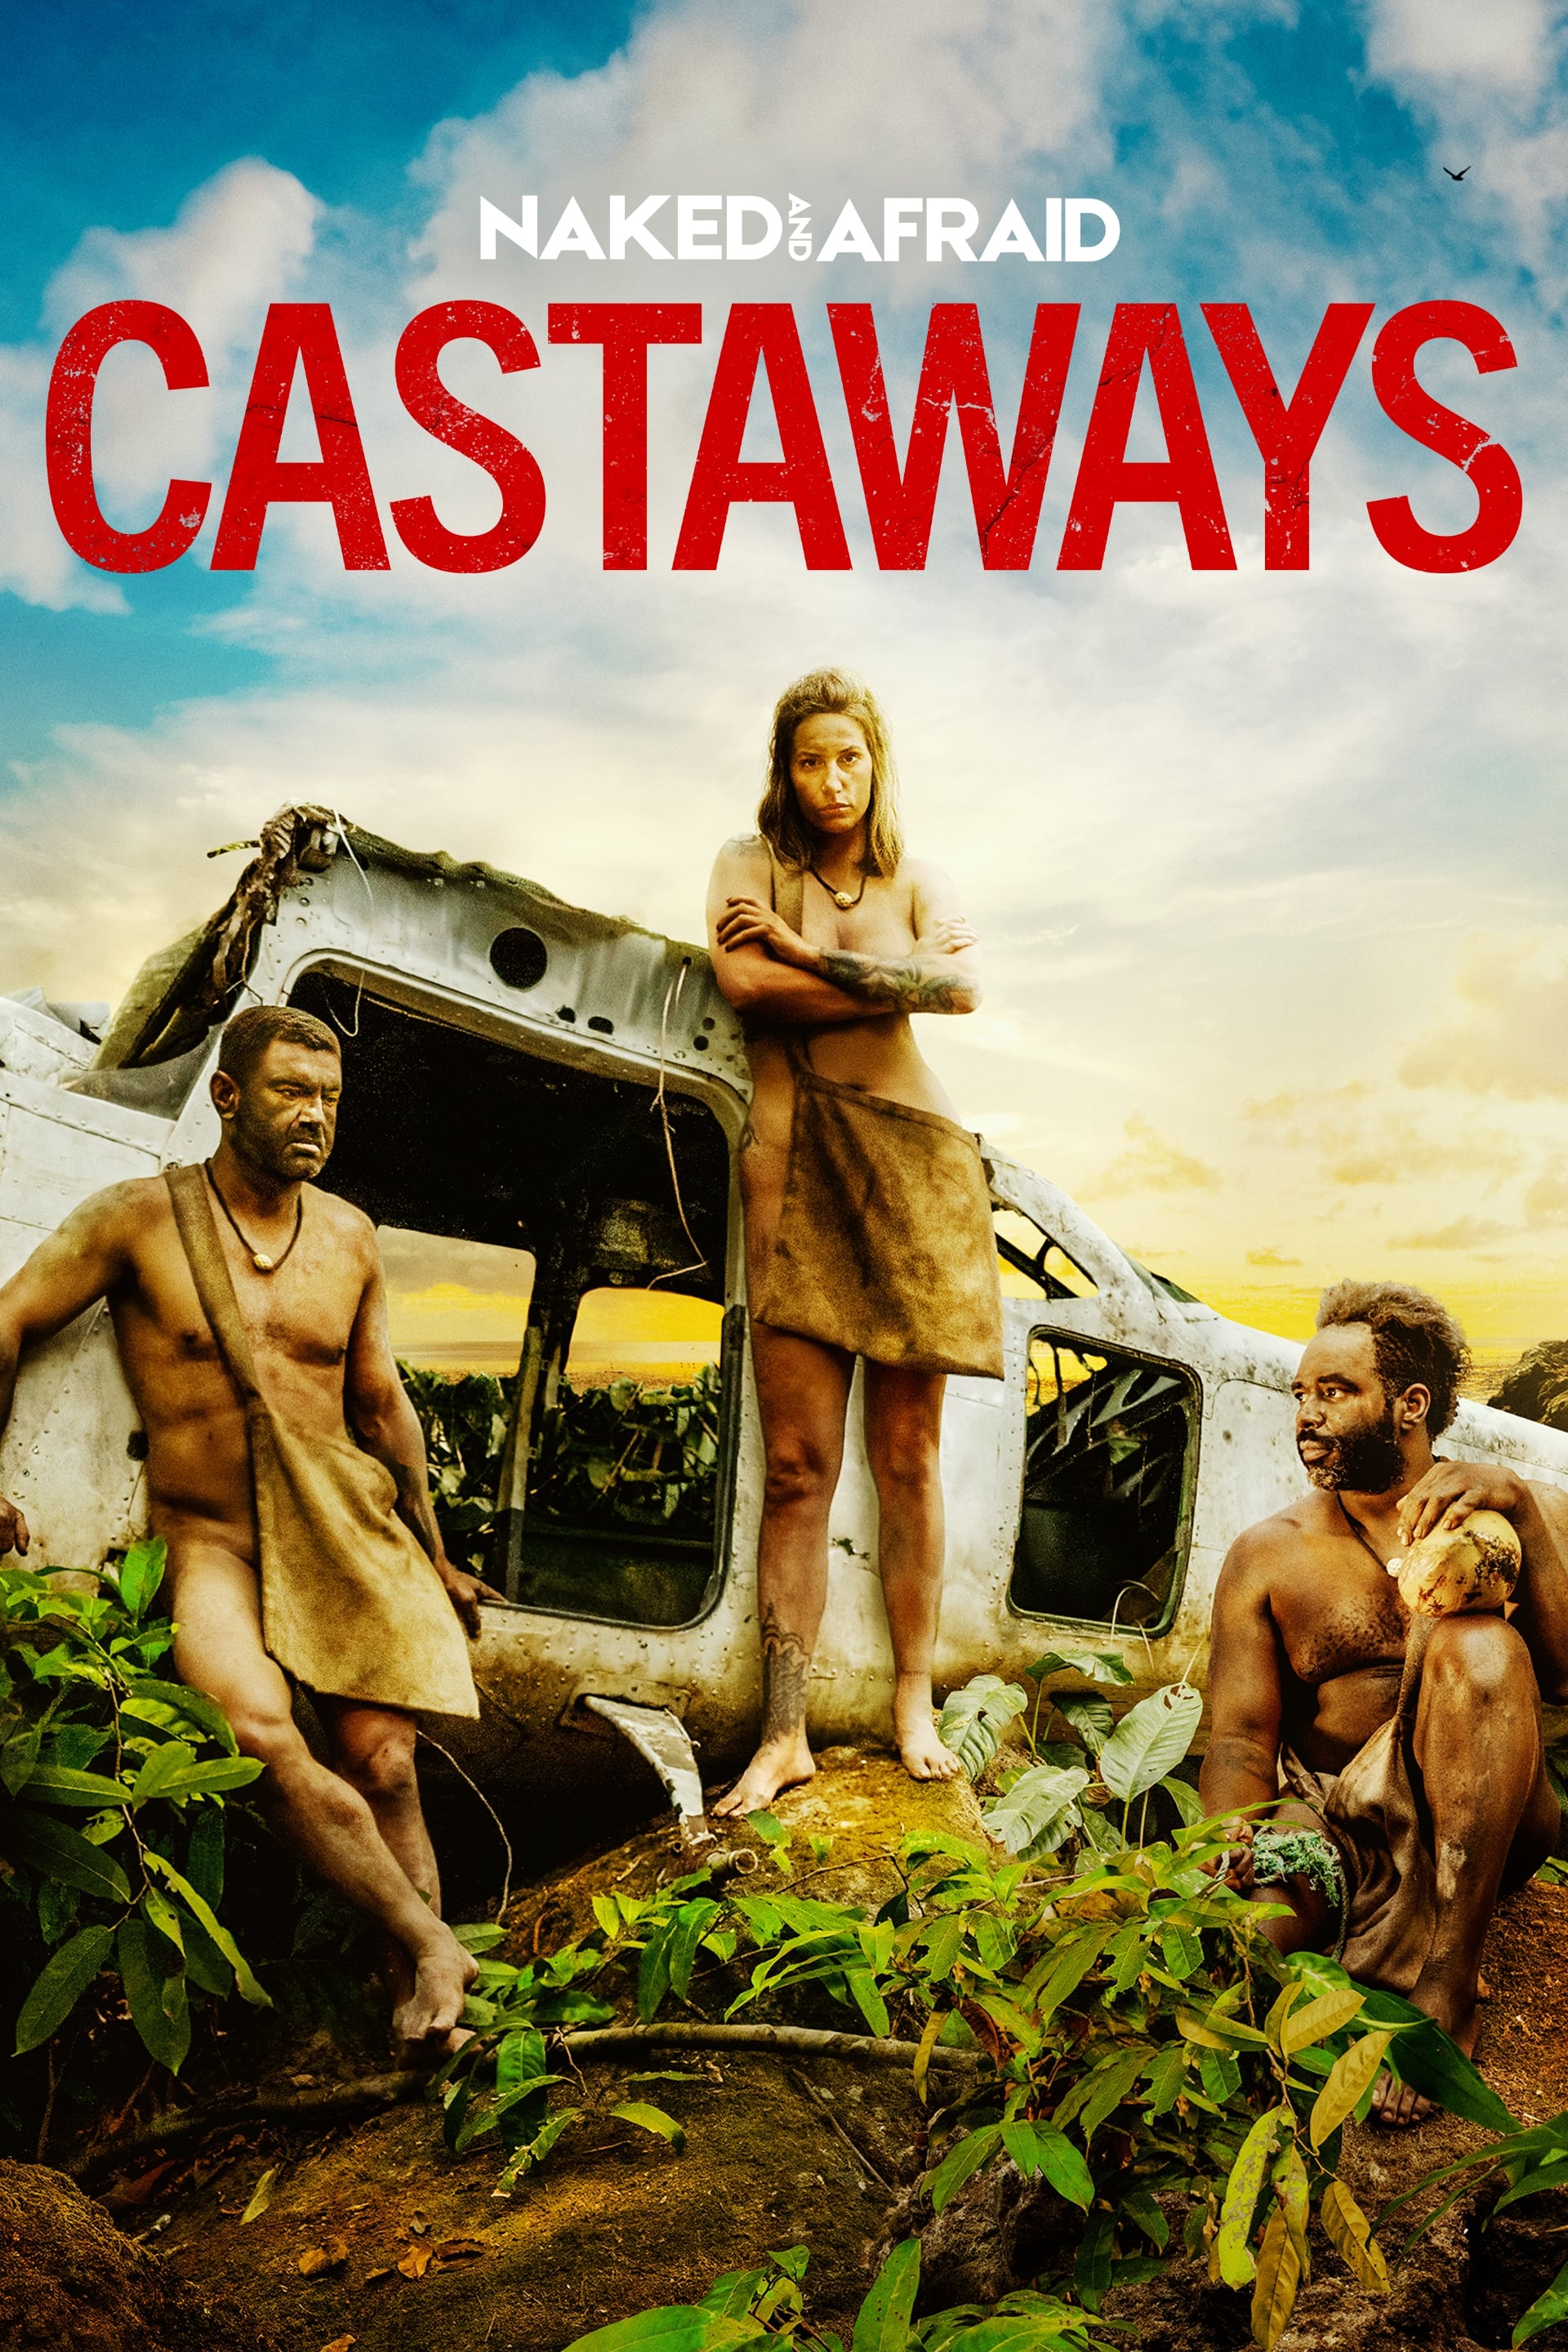 Naked and Afraid: Castaways TV Shows About Survival